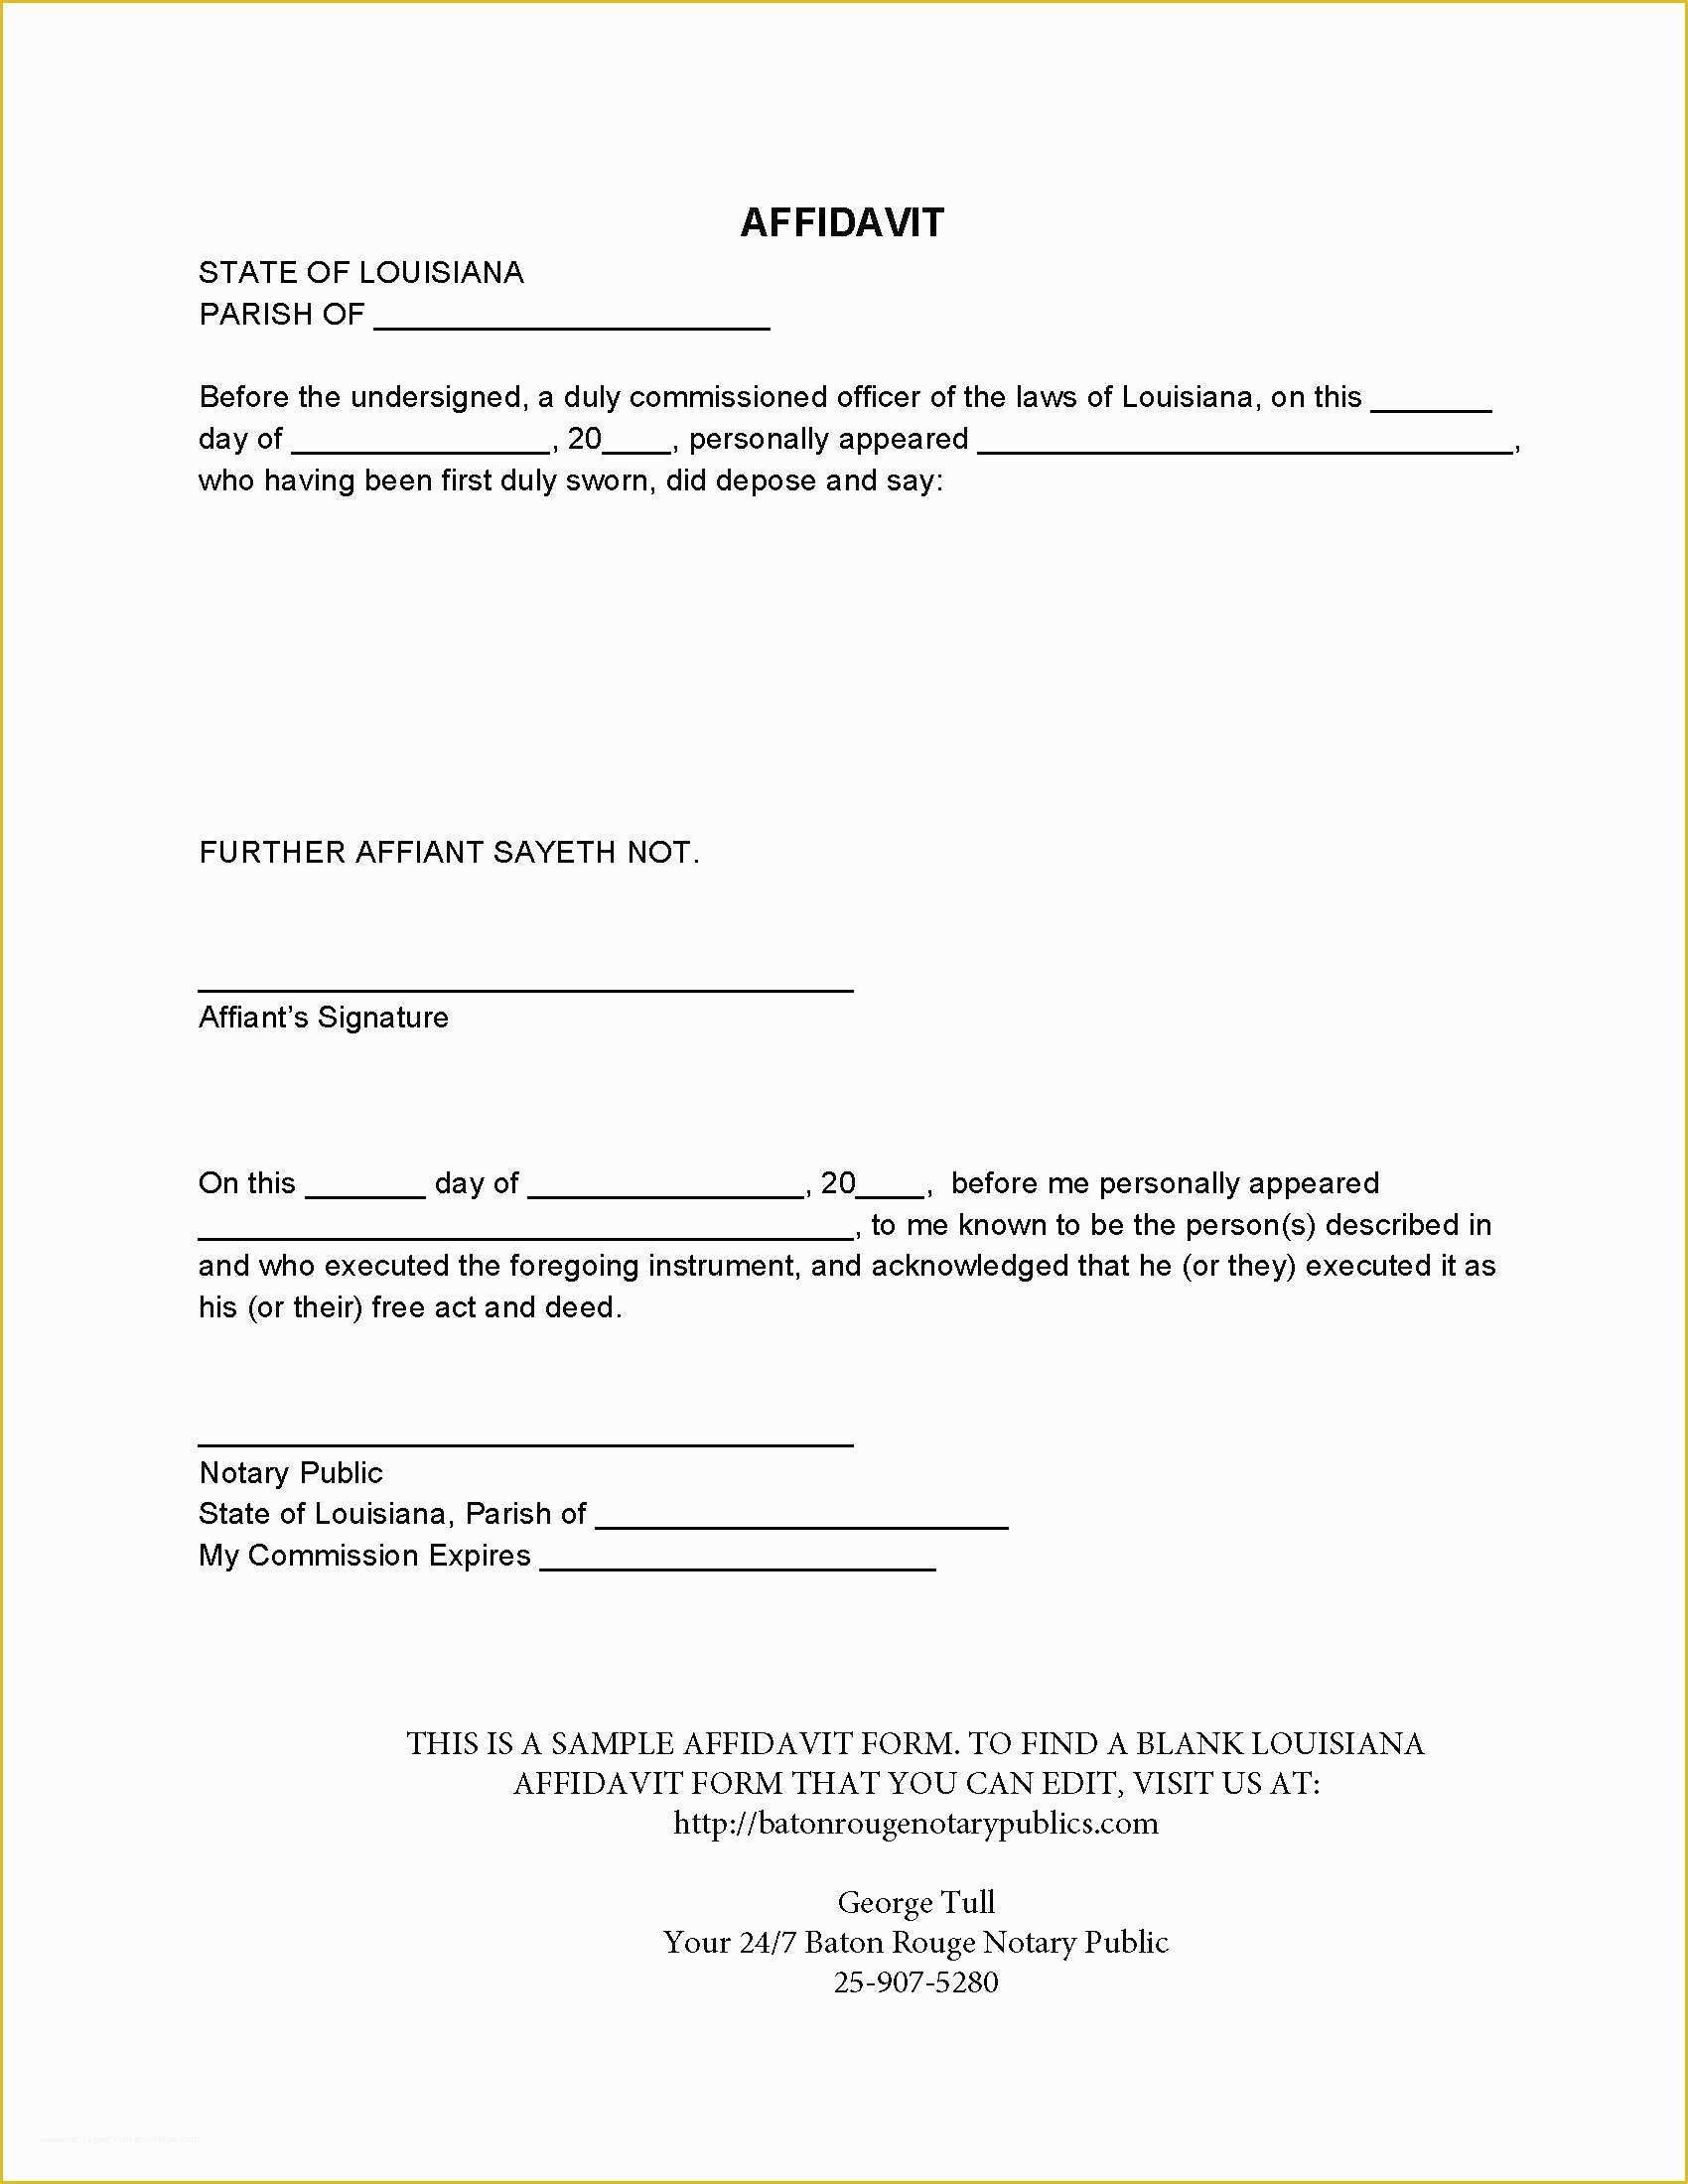 Free Florida Affidavit Template Of Very Simple Affidavit form Template Example Featuring some